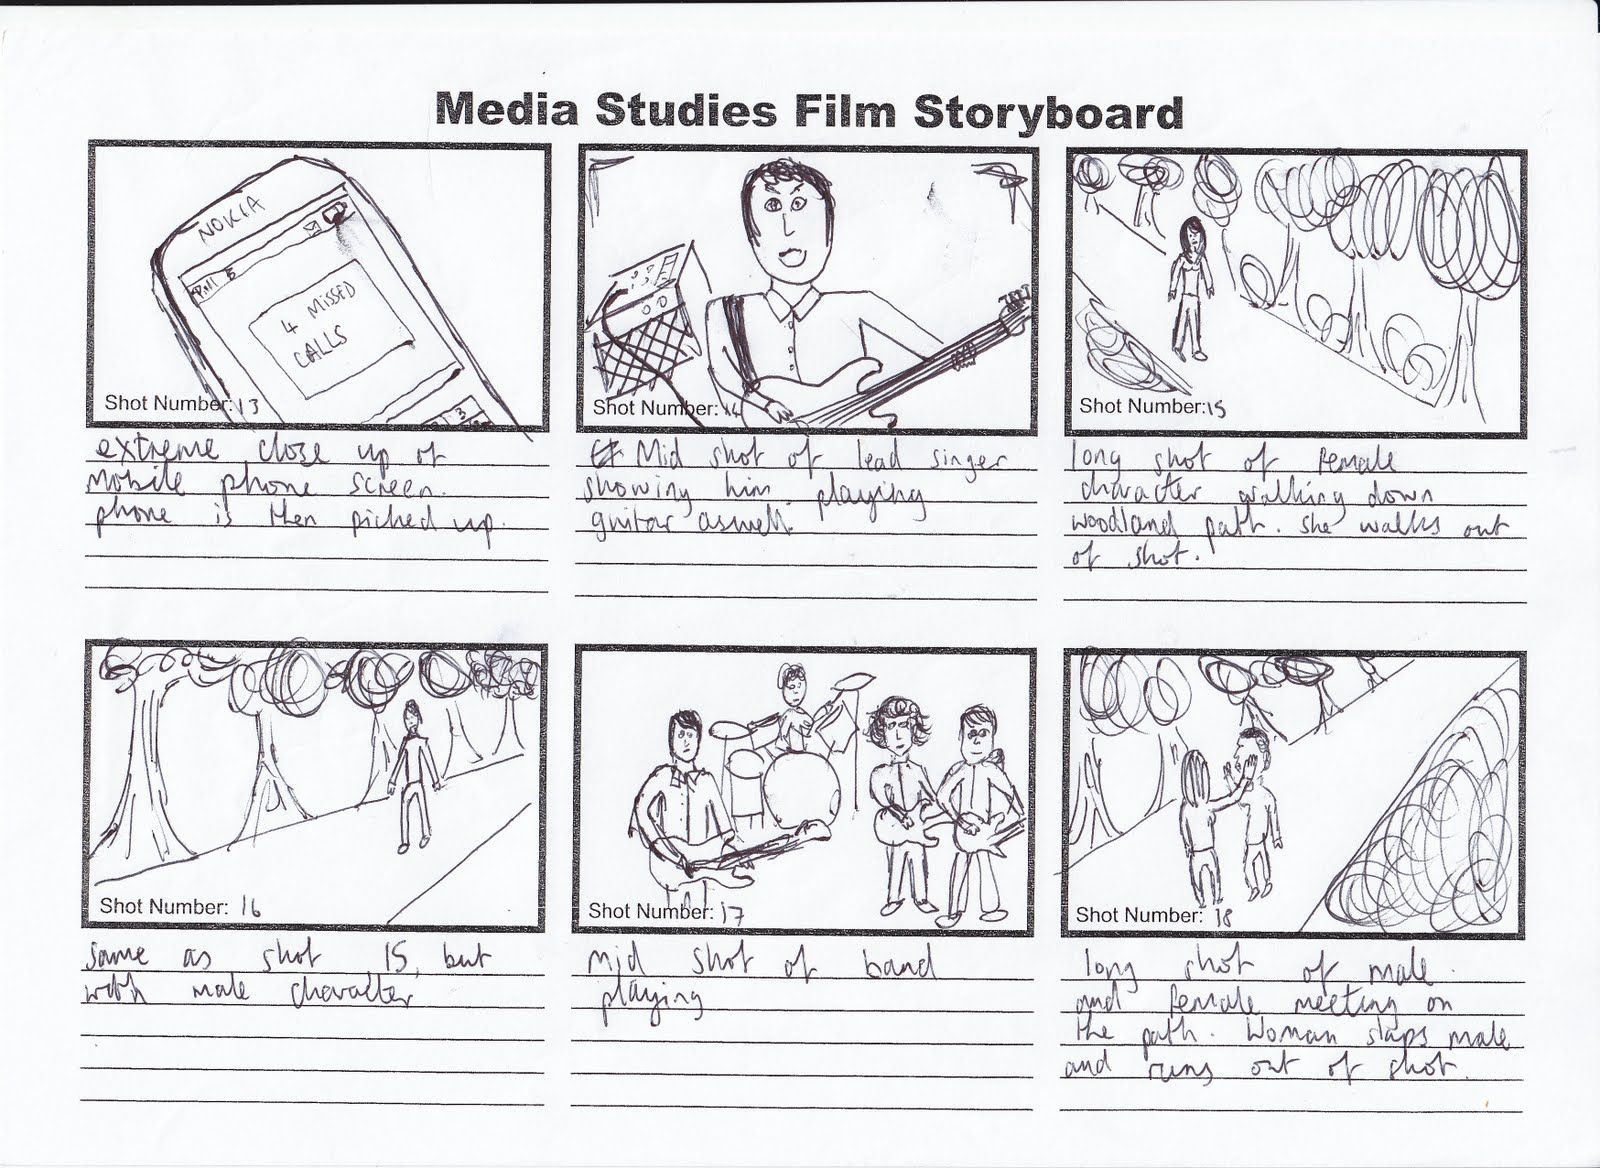 storyboard that assignment